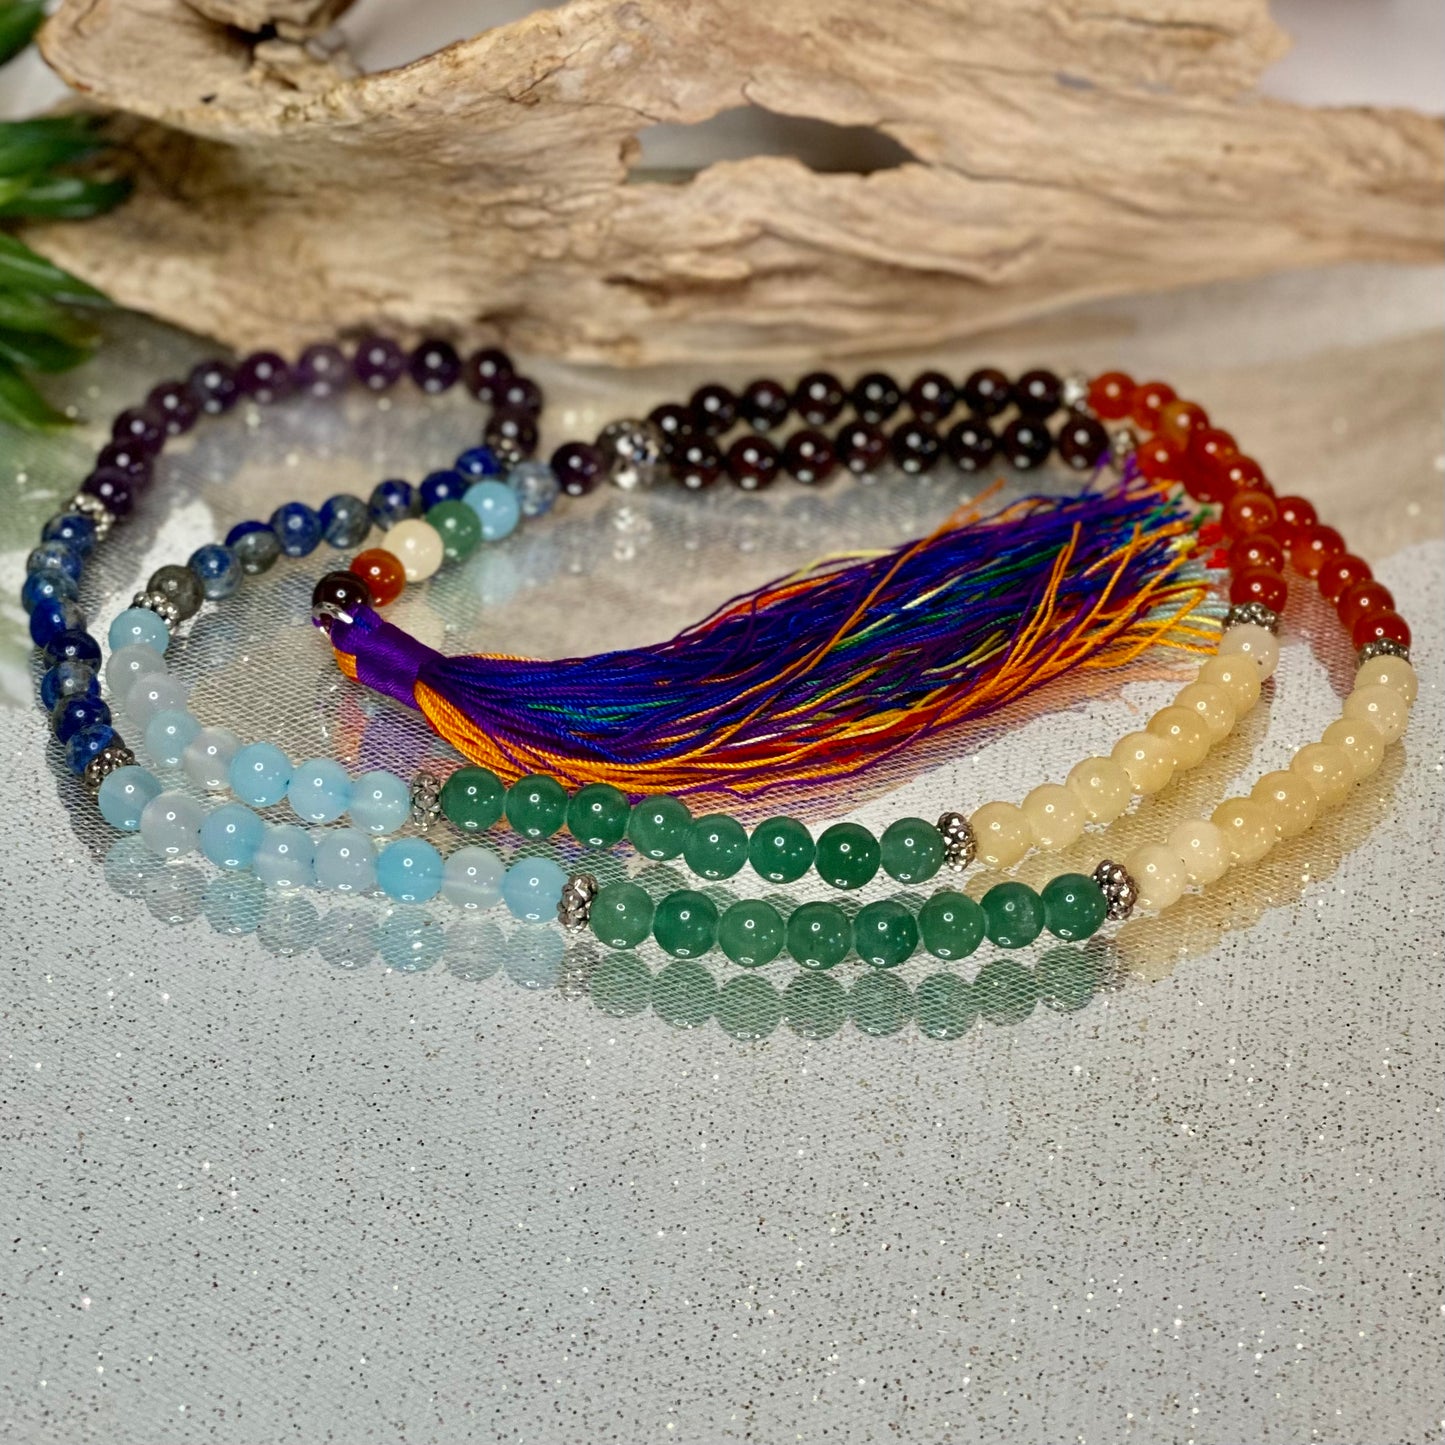 Balanced Your Energies with the 108 Bead Chakra Mala Necklace